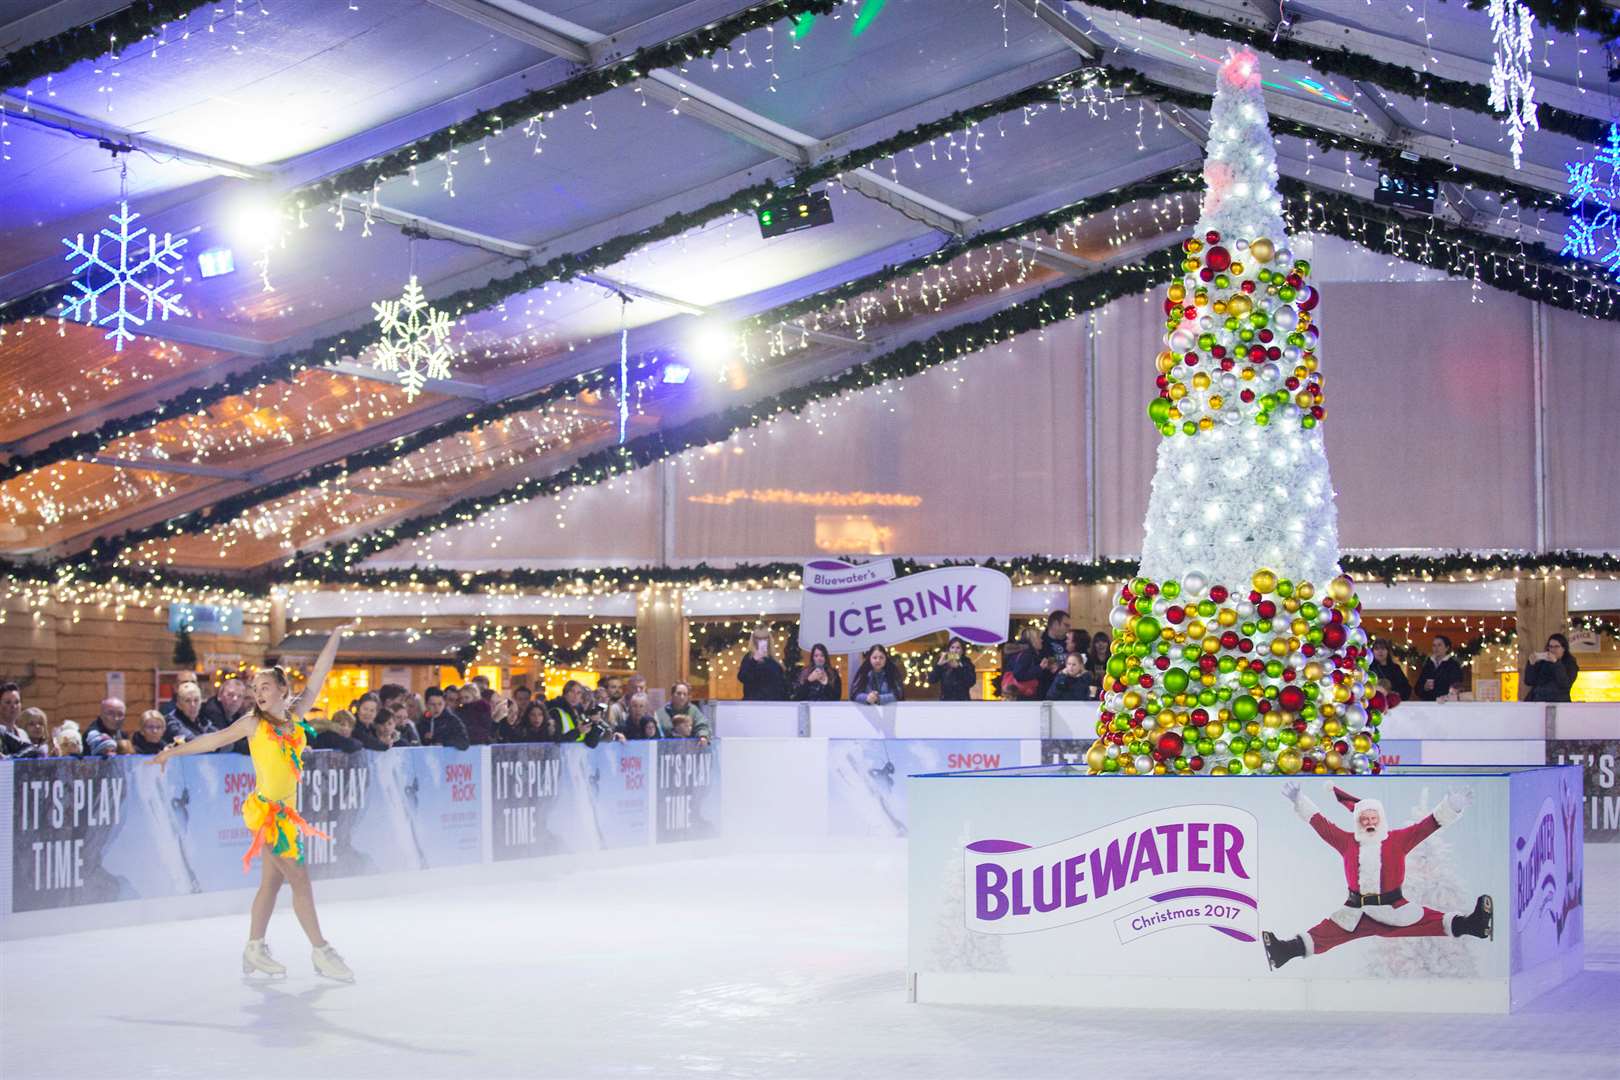 Bluewater has an ice rink